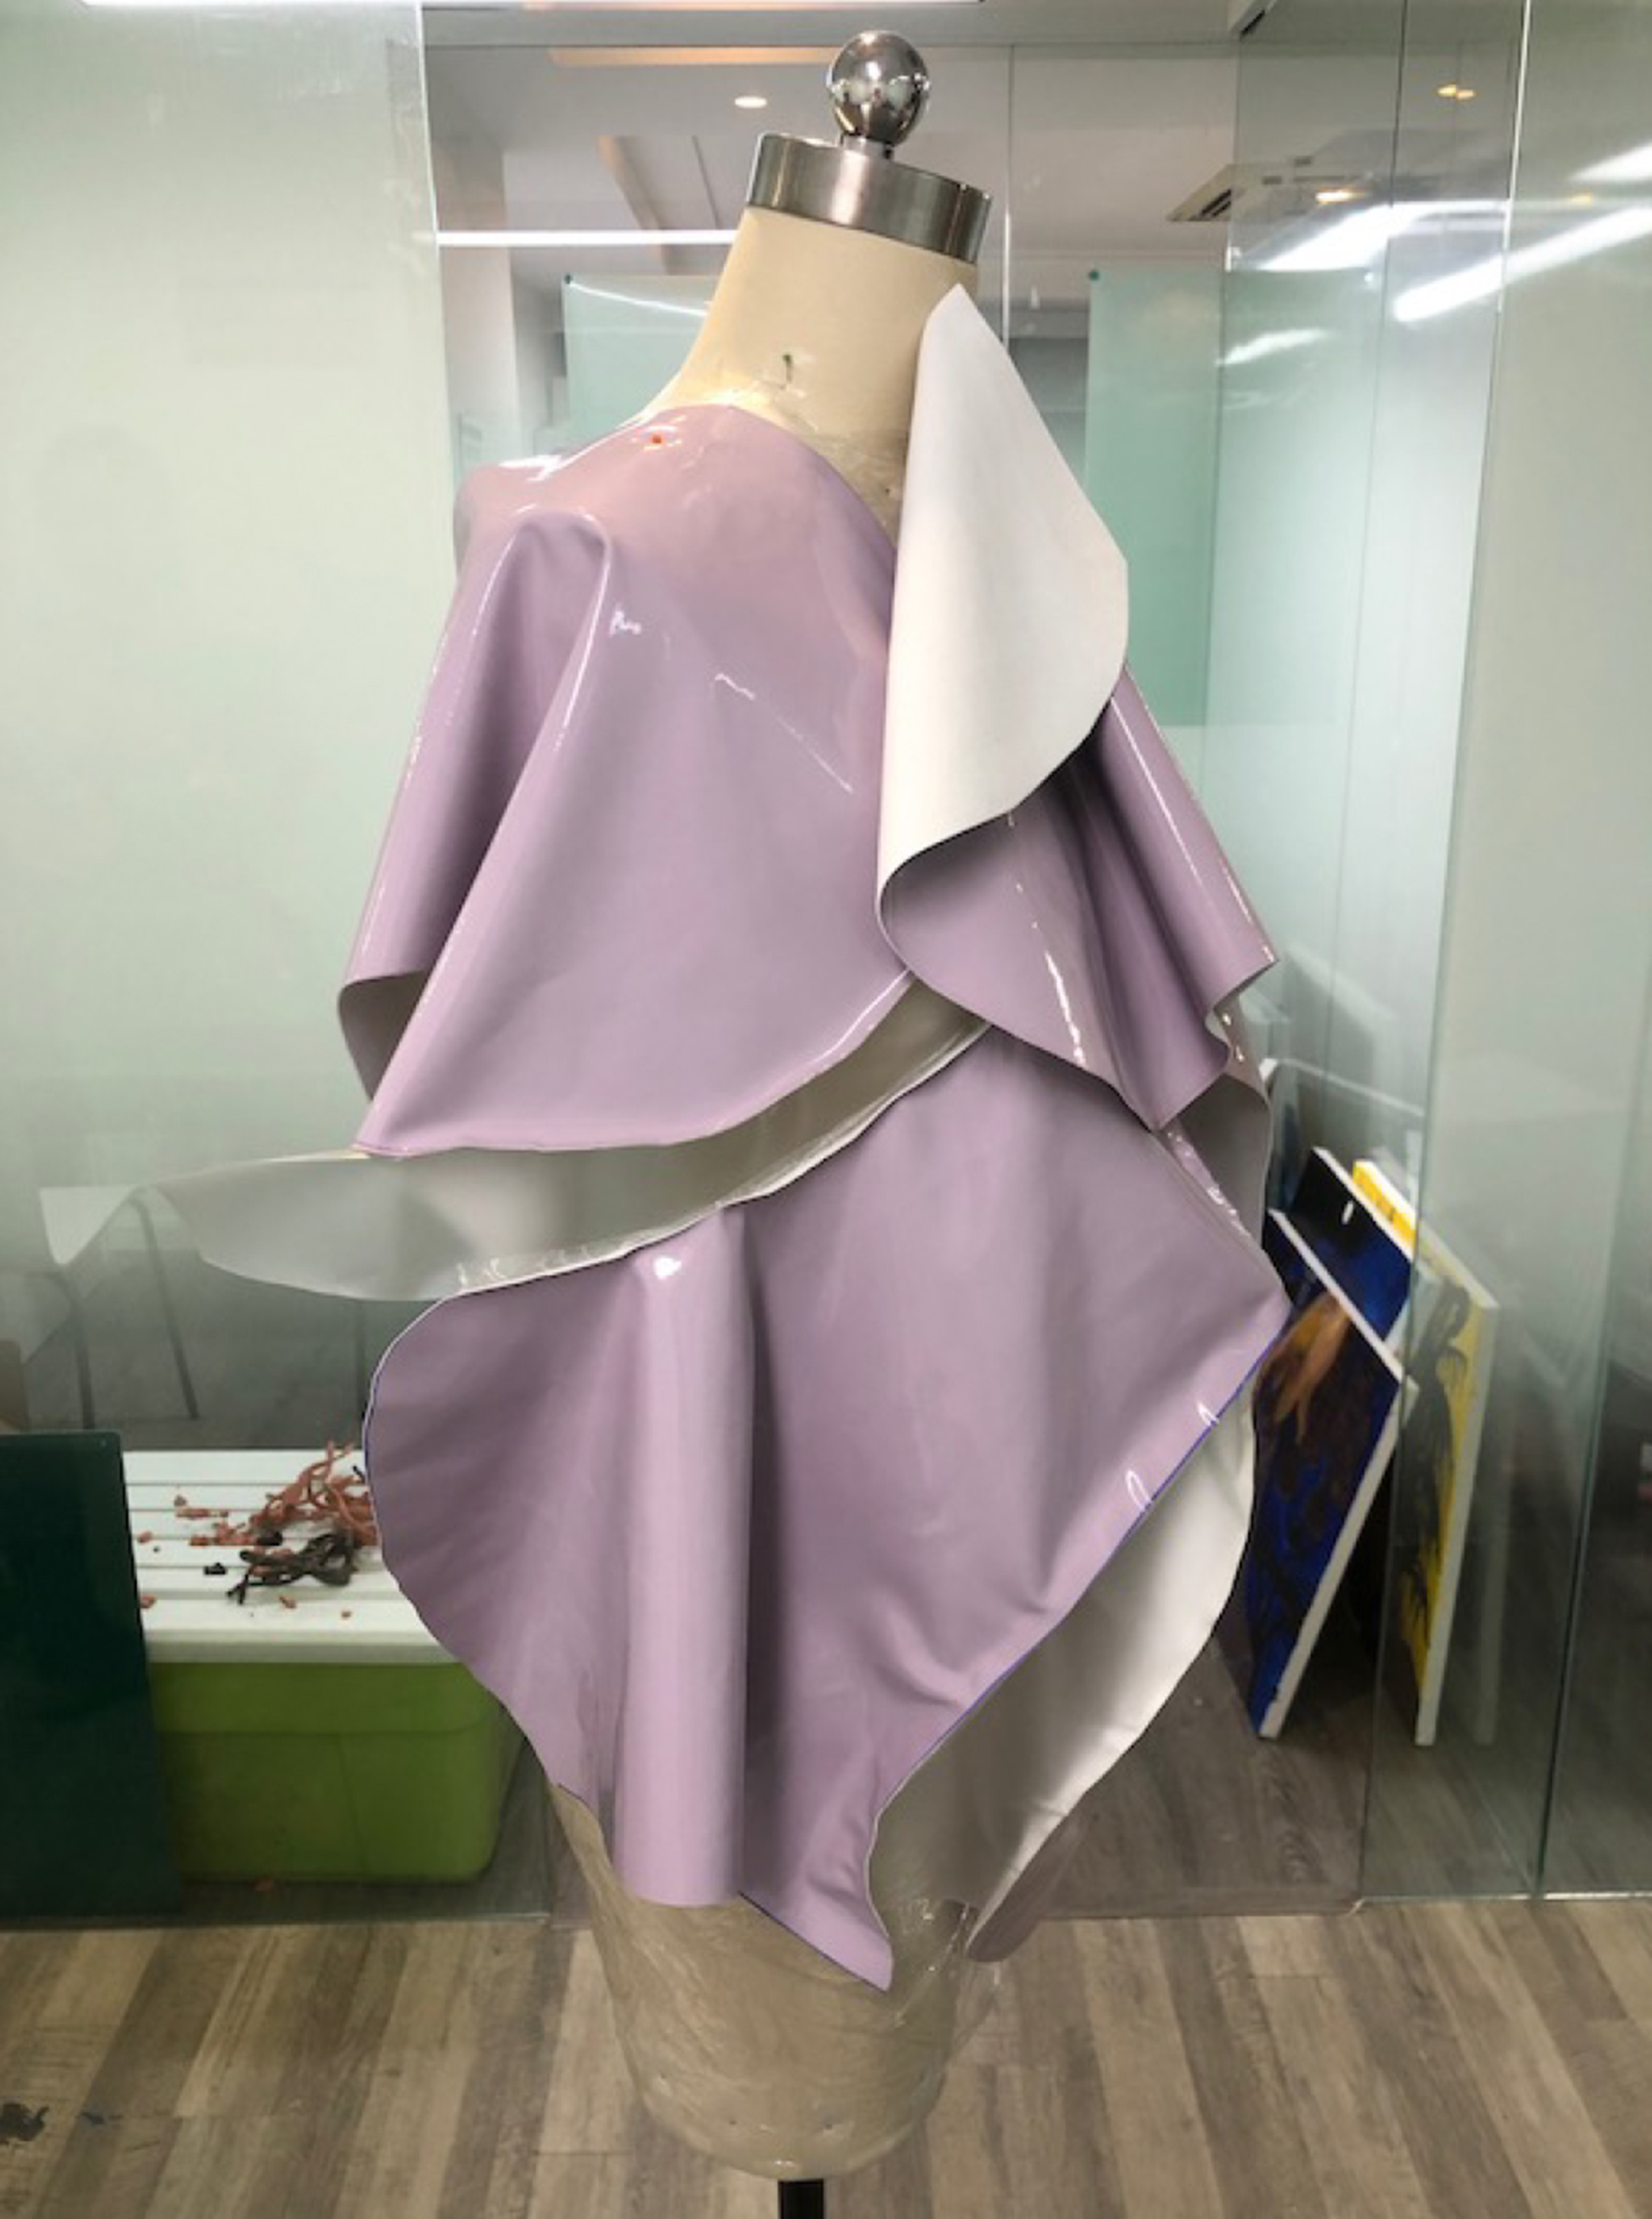 Photo of a pink dress, rather shapeless, made from a vinyl-like material